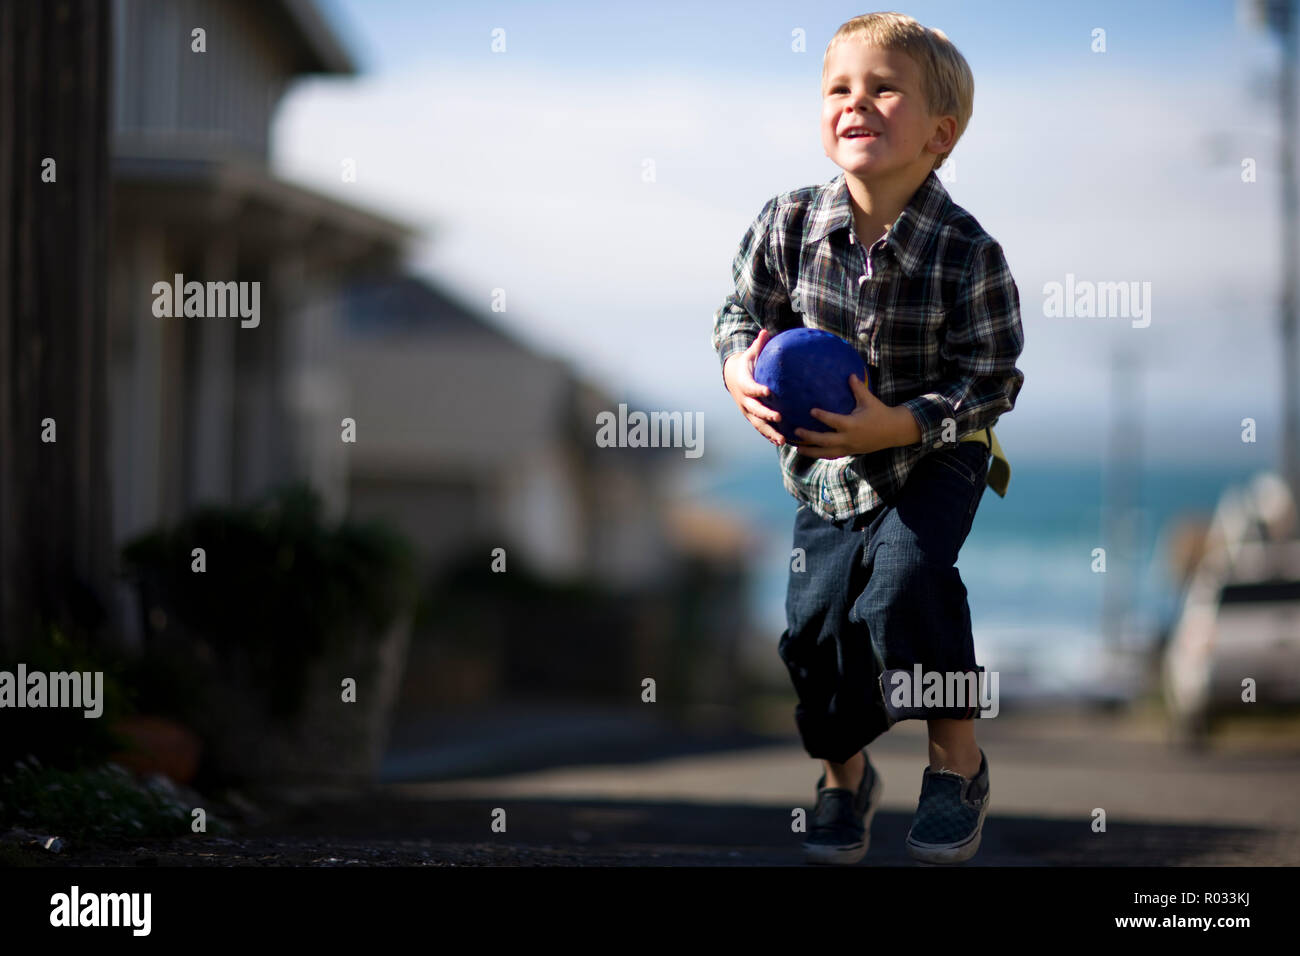 Young boy playing outside with a toy football. Stock Photo